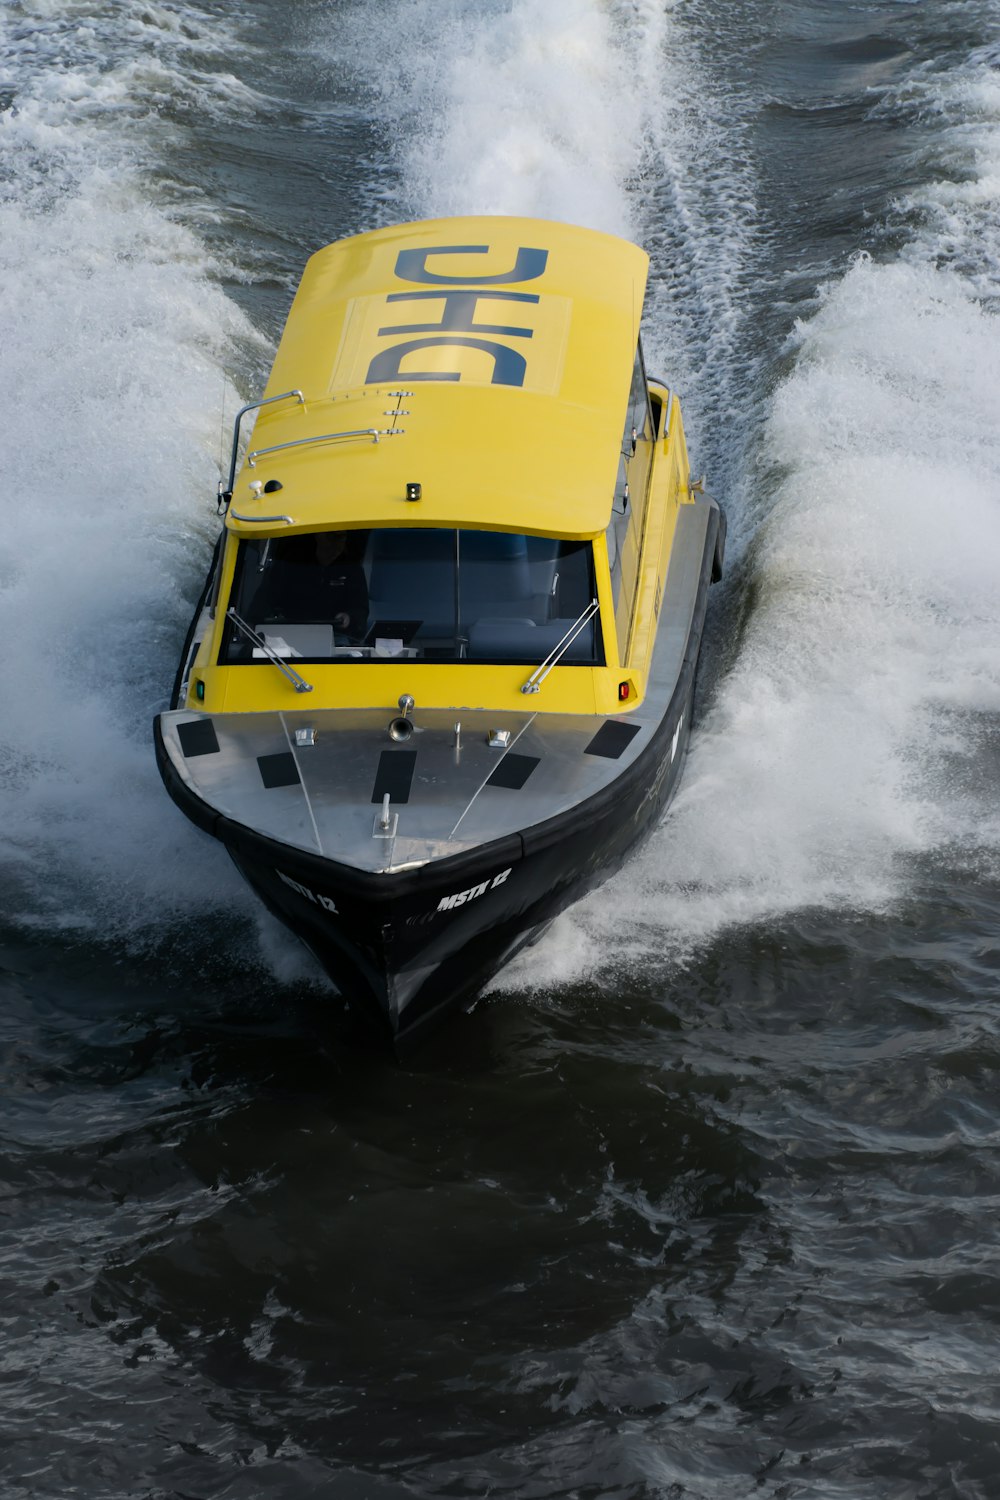 a yellow and black speed boat in the water